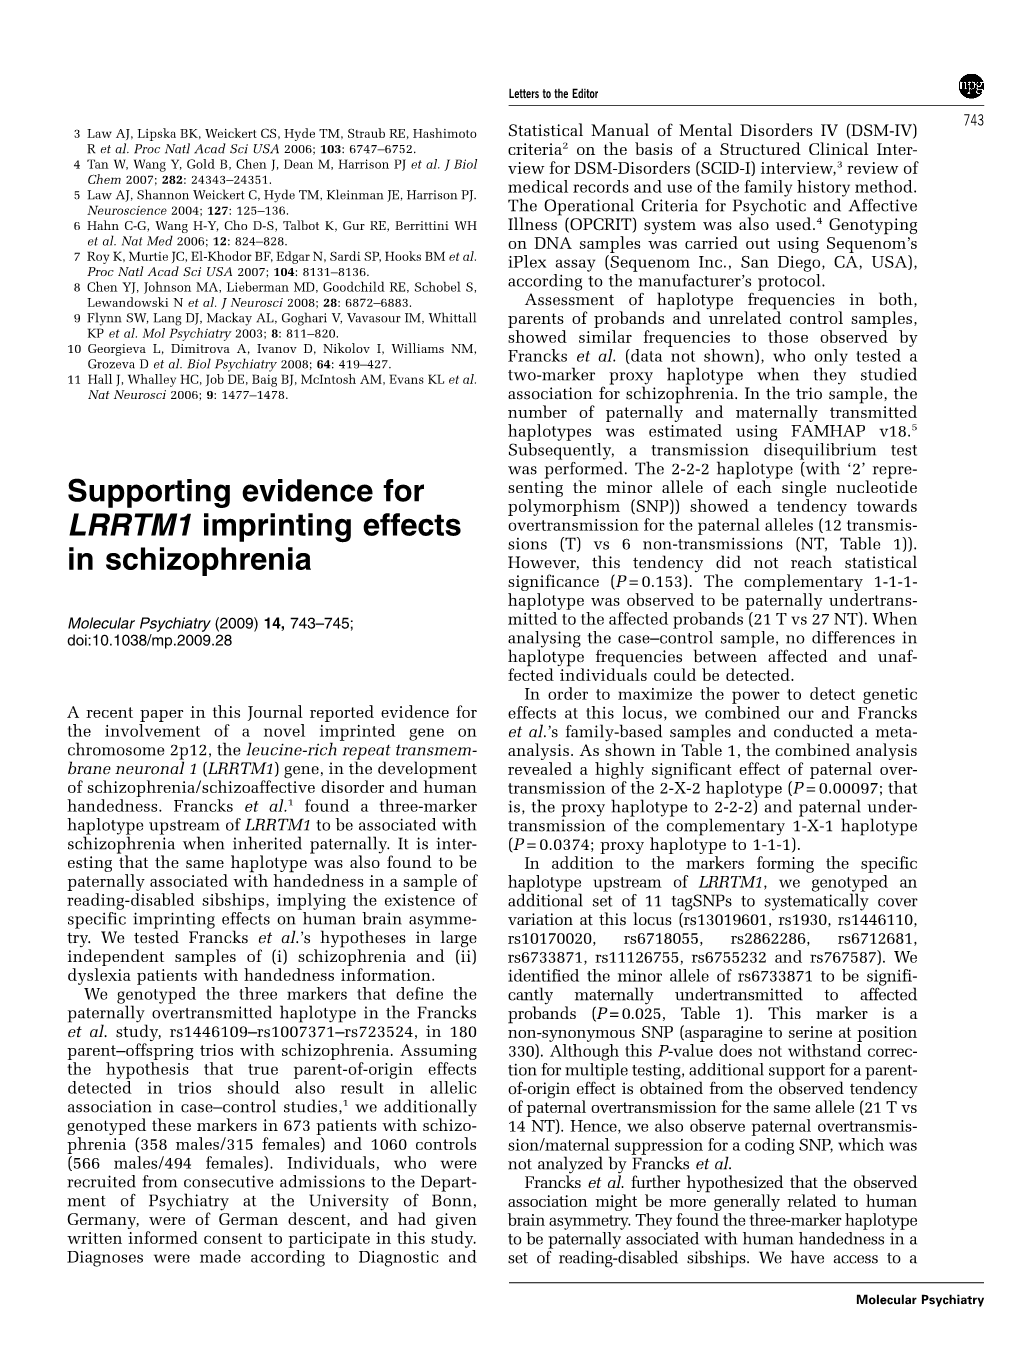 Supporting Evidence for LRRTM1 Imprinting Effects in Schizophrenia